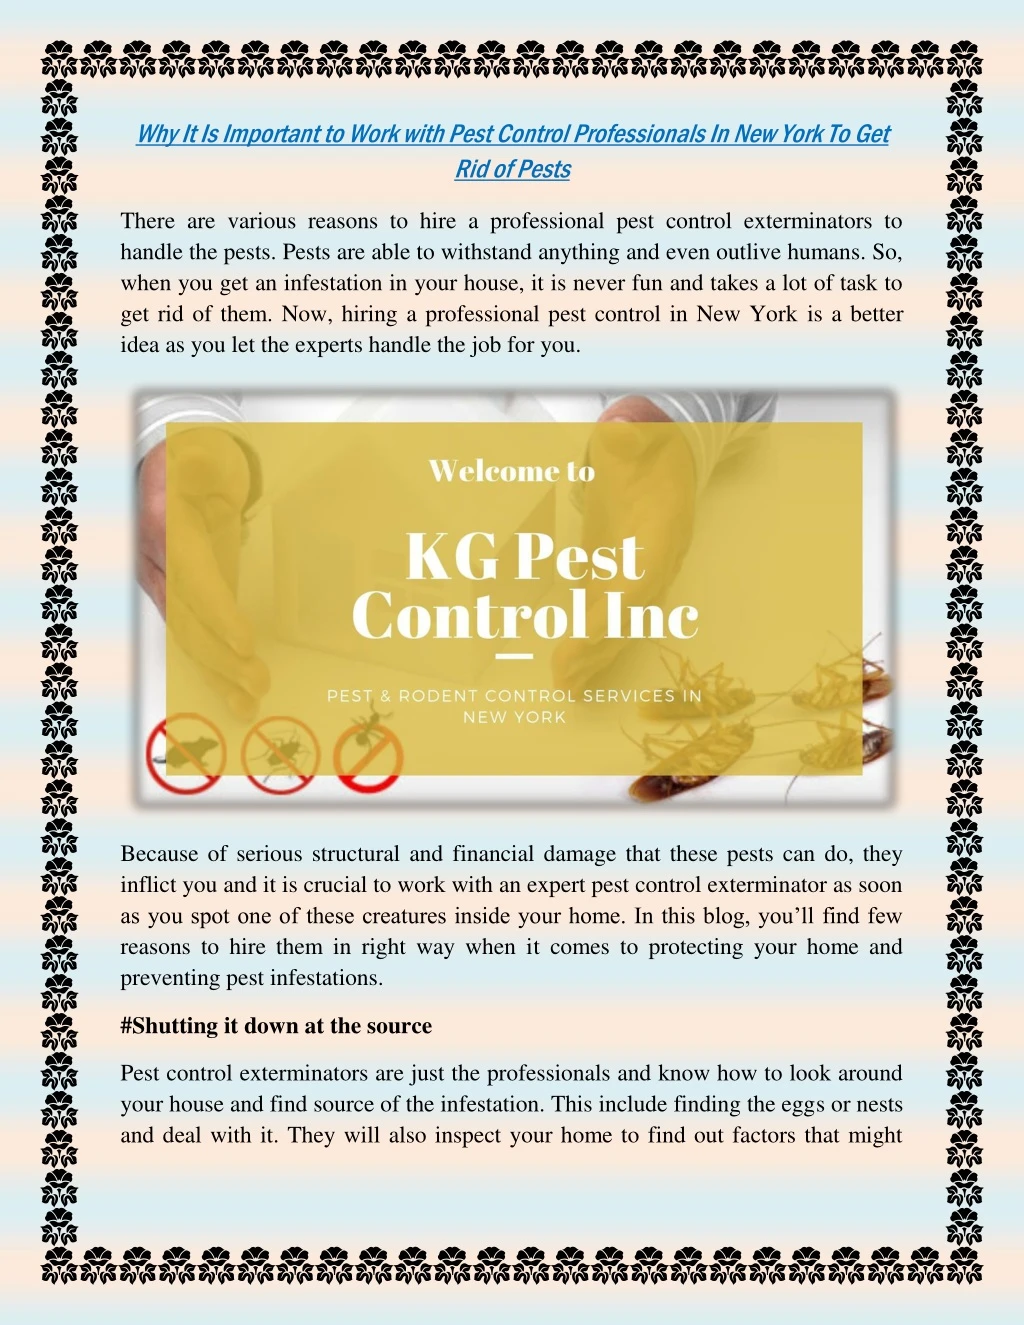 why it is important to work with pest control